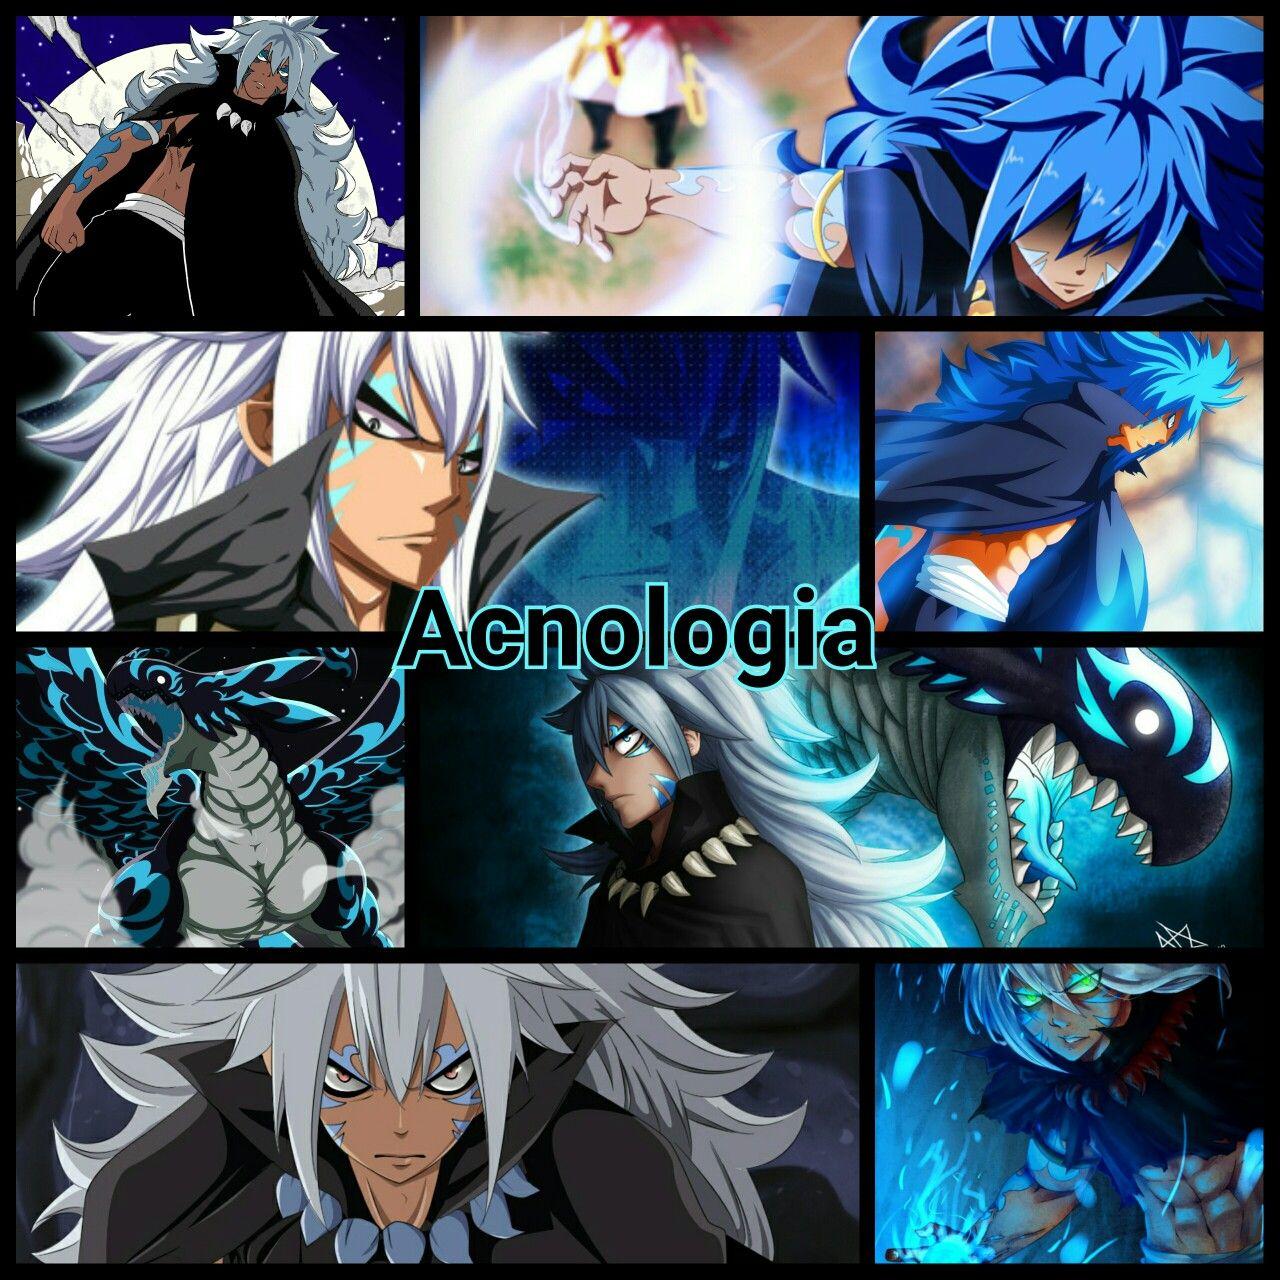 The awesomely powerful Acnologia in his human form! Enjoy